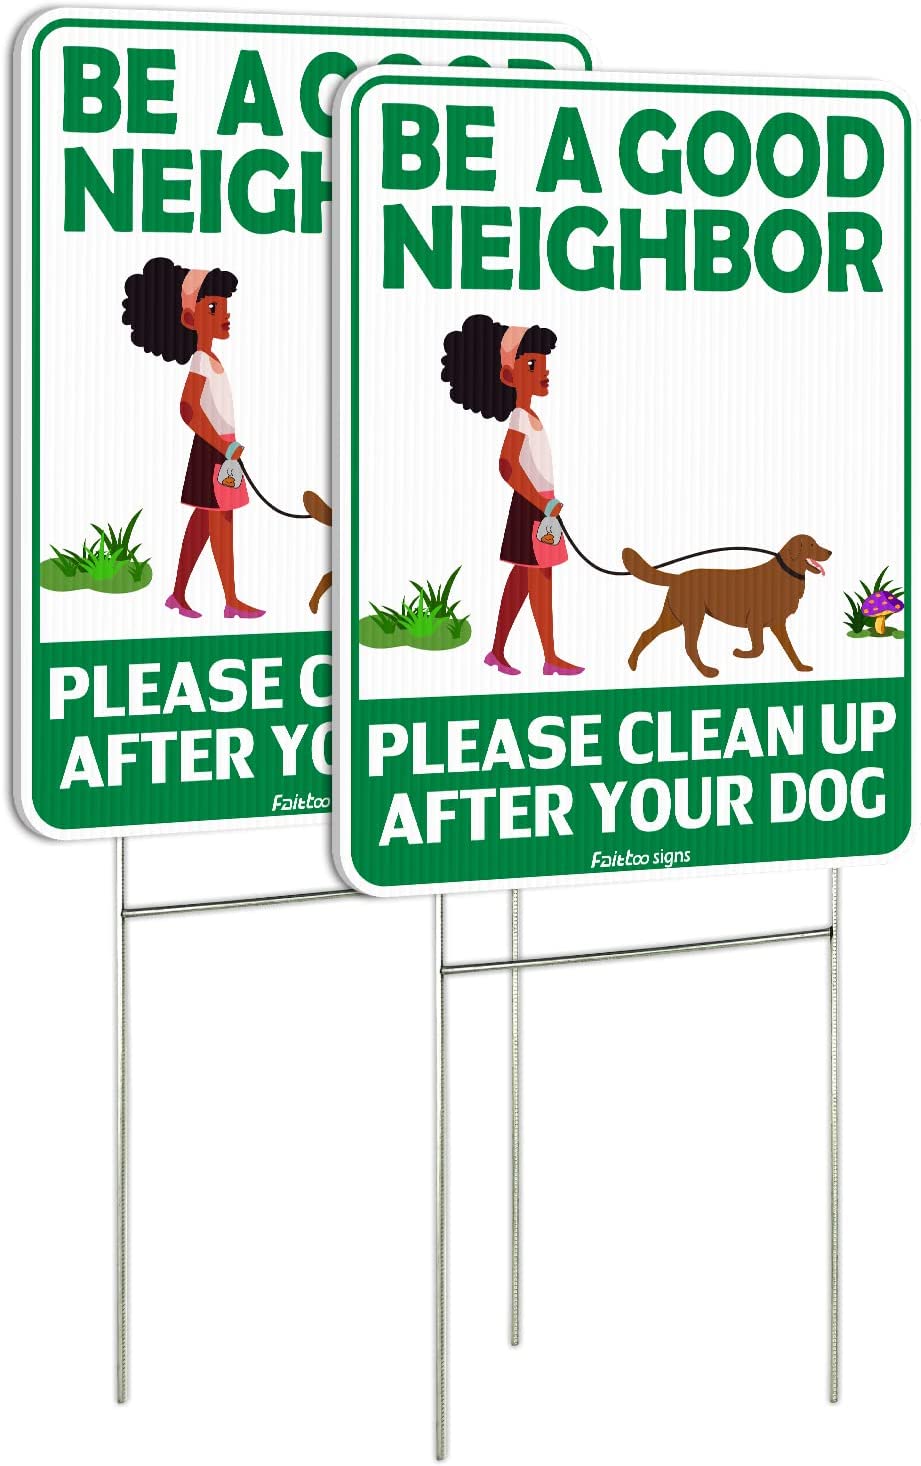 Be a Good Neighbor Clean Up After Your Dog 12 x 9 Inches Yard Sign with Metal Wire H-Stakes, Double Sided, No Pooping Dog Lawn Signs, Waterproof, Weather Resistant, Easy to Mount